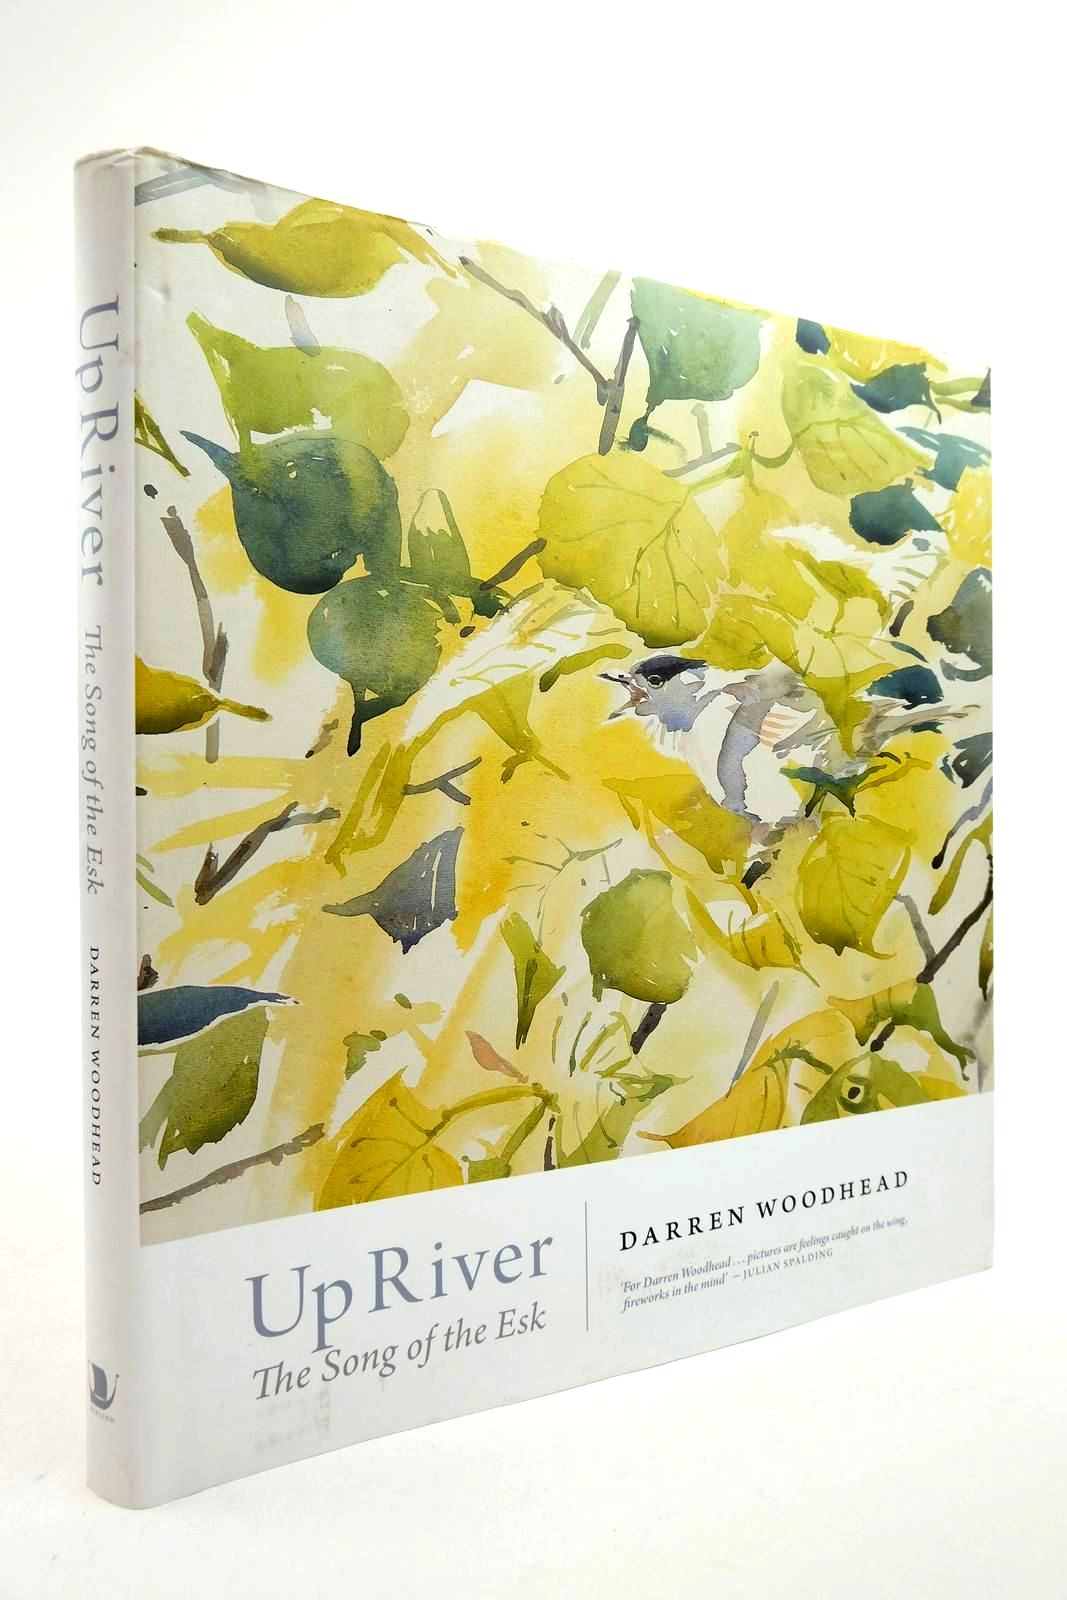 Photo of UP RIVER THE SONG OF THE ESK written by Woodhead, Darren illustrated by Woodhead, Darren published by Birlinn Limited (STOCK CODE: 2140225)  for sale by Stella & Rose's Books